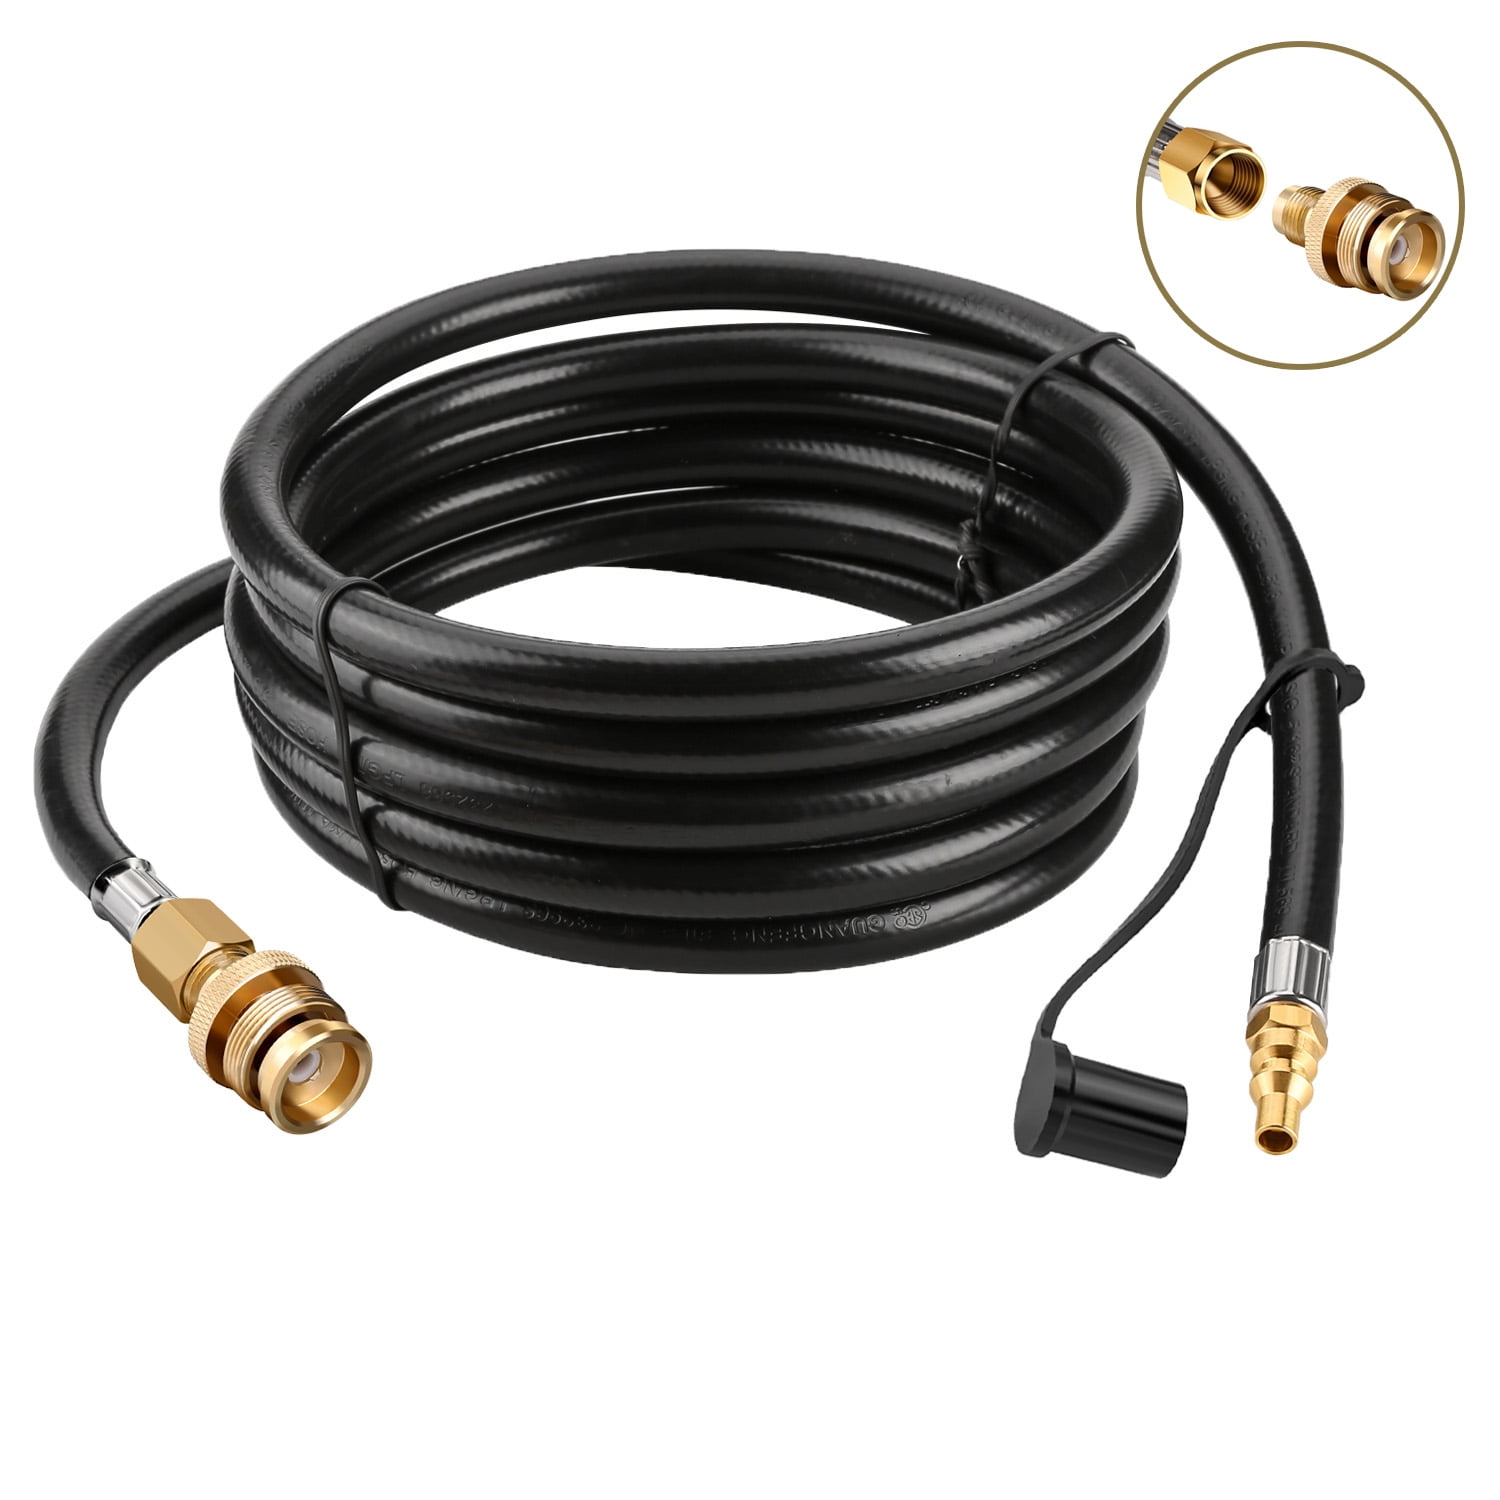 4 Feet 1//4/" Quick Connect RV Propane Hose Converter Replacement For Lb Throwaway